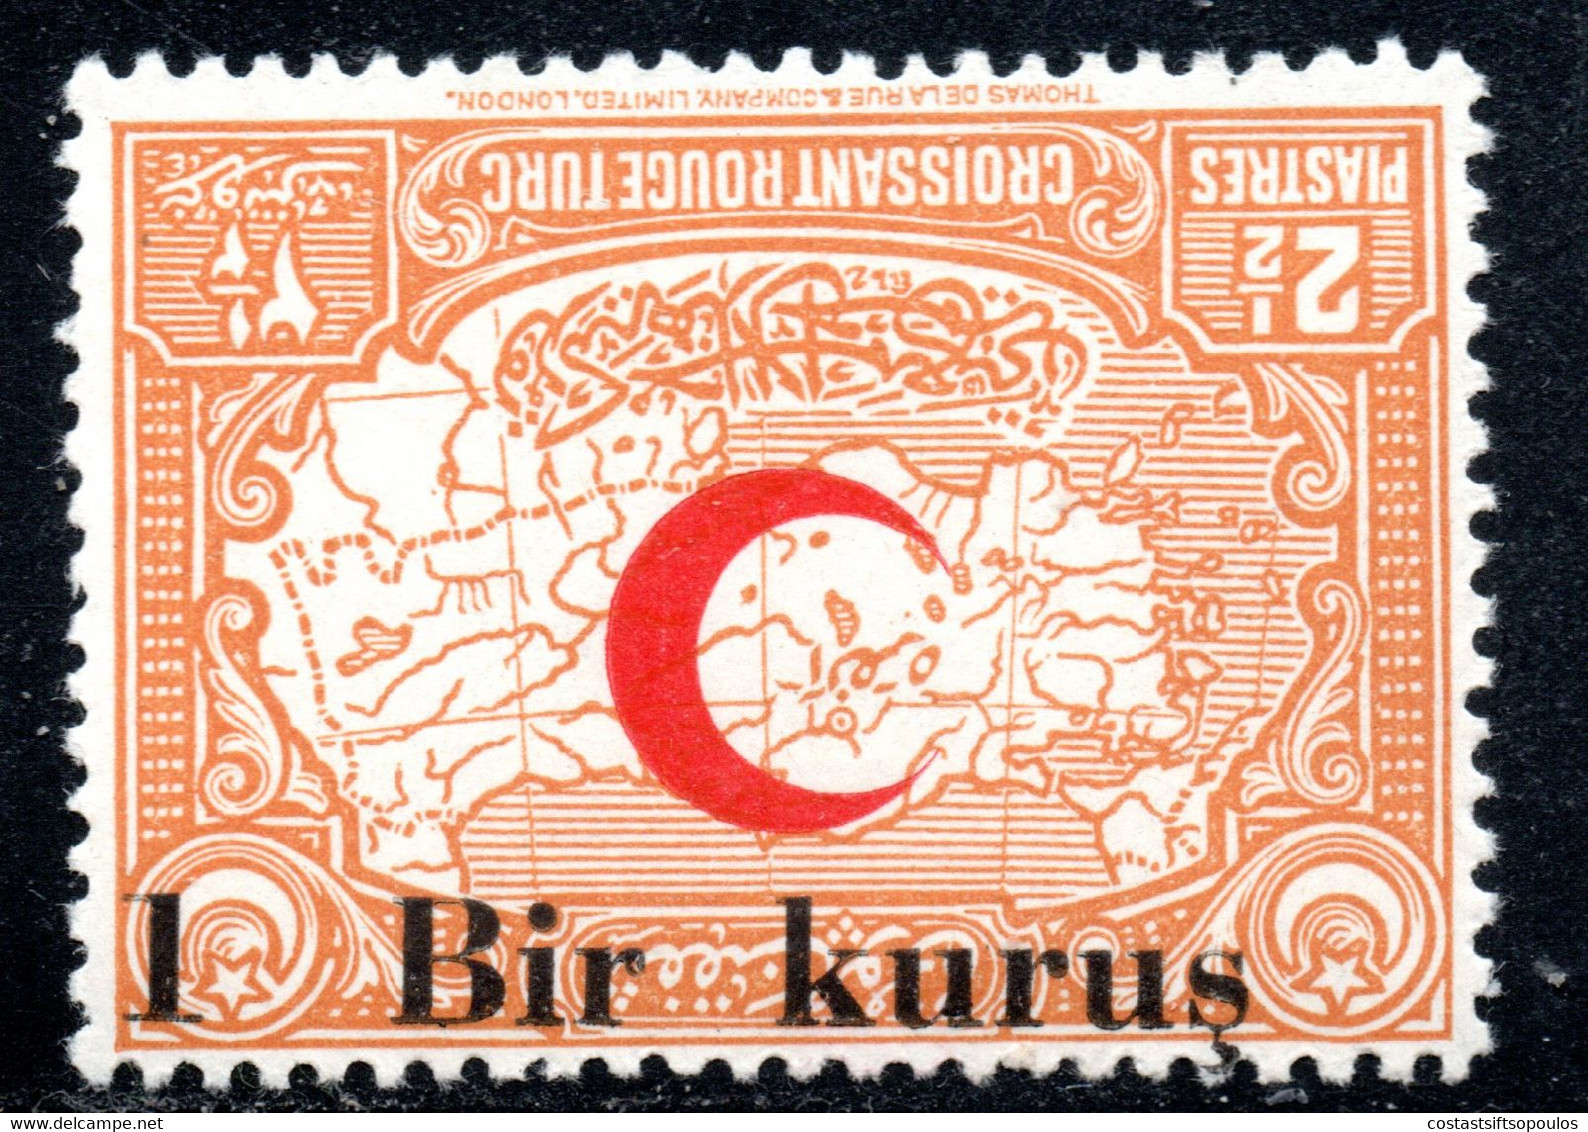 1011.TURKEY,1933-1934 RED CRESCENT,MAP MICH.24,SC.RA 21 INVERTED SURCHARGE,MNH,UNRECORDED - Ongebruikt